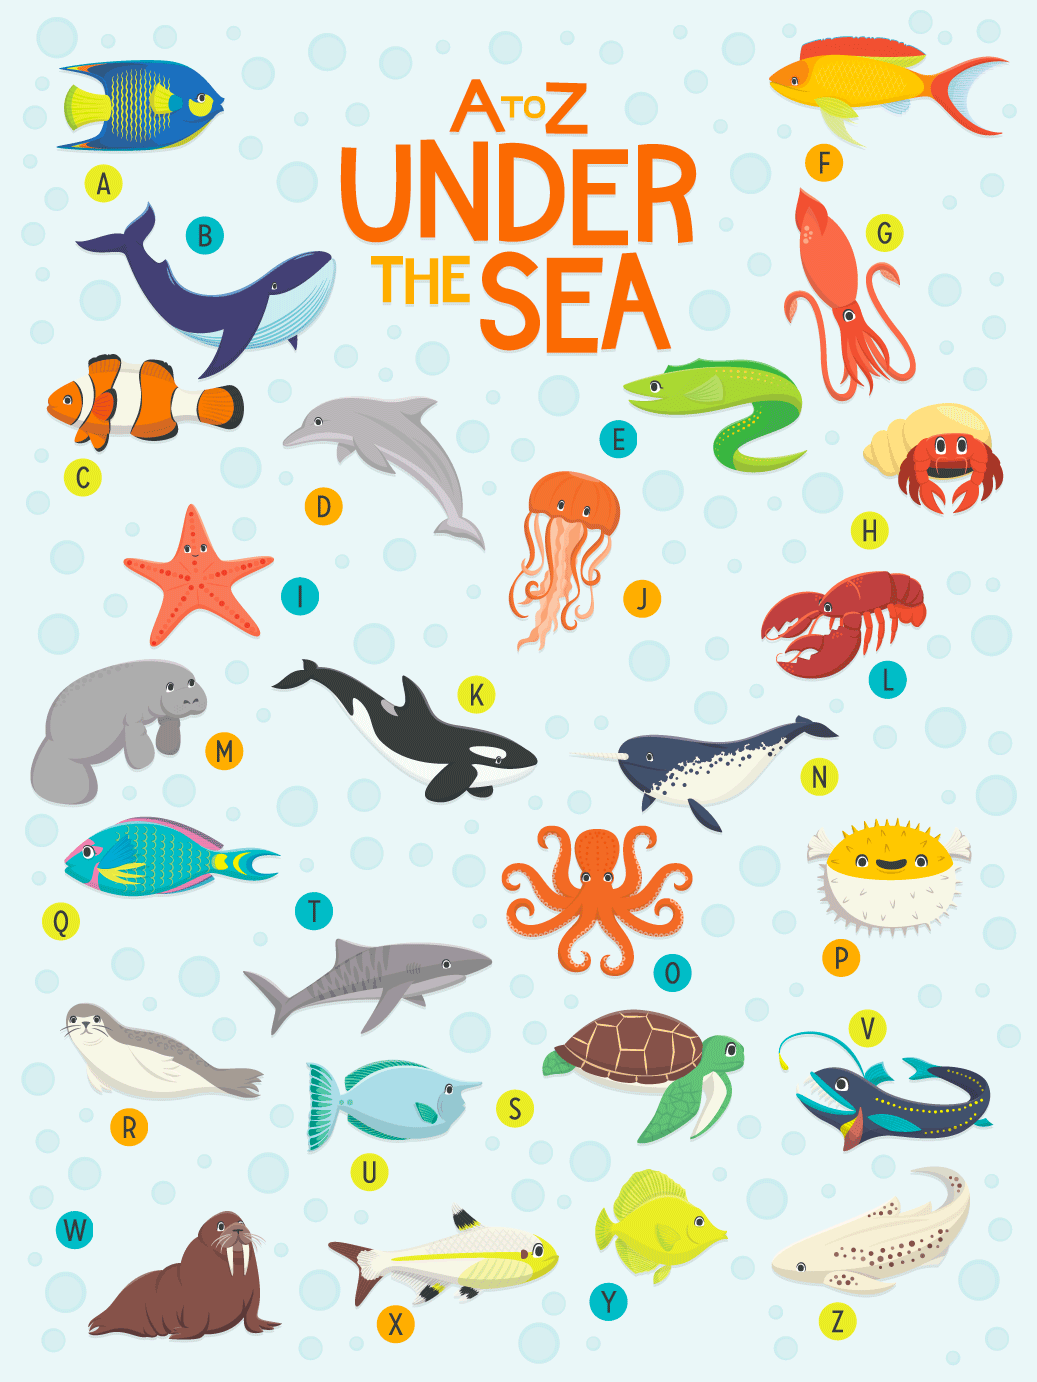 Can You Name These A-Z Sea Animals? 🐠🐡🦀🐬🐢